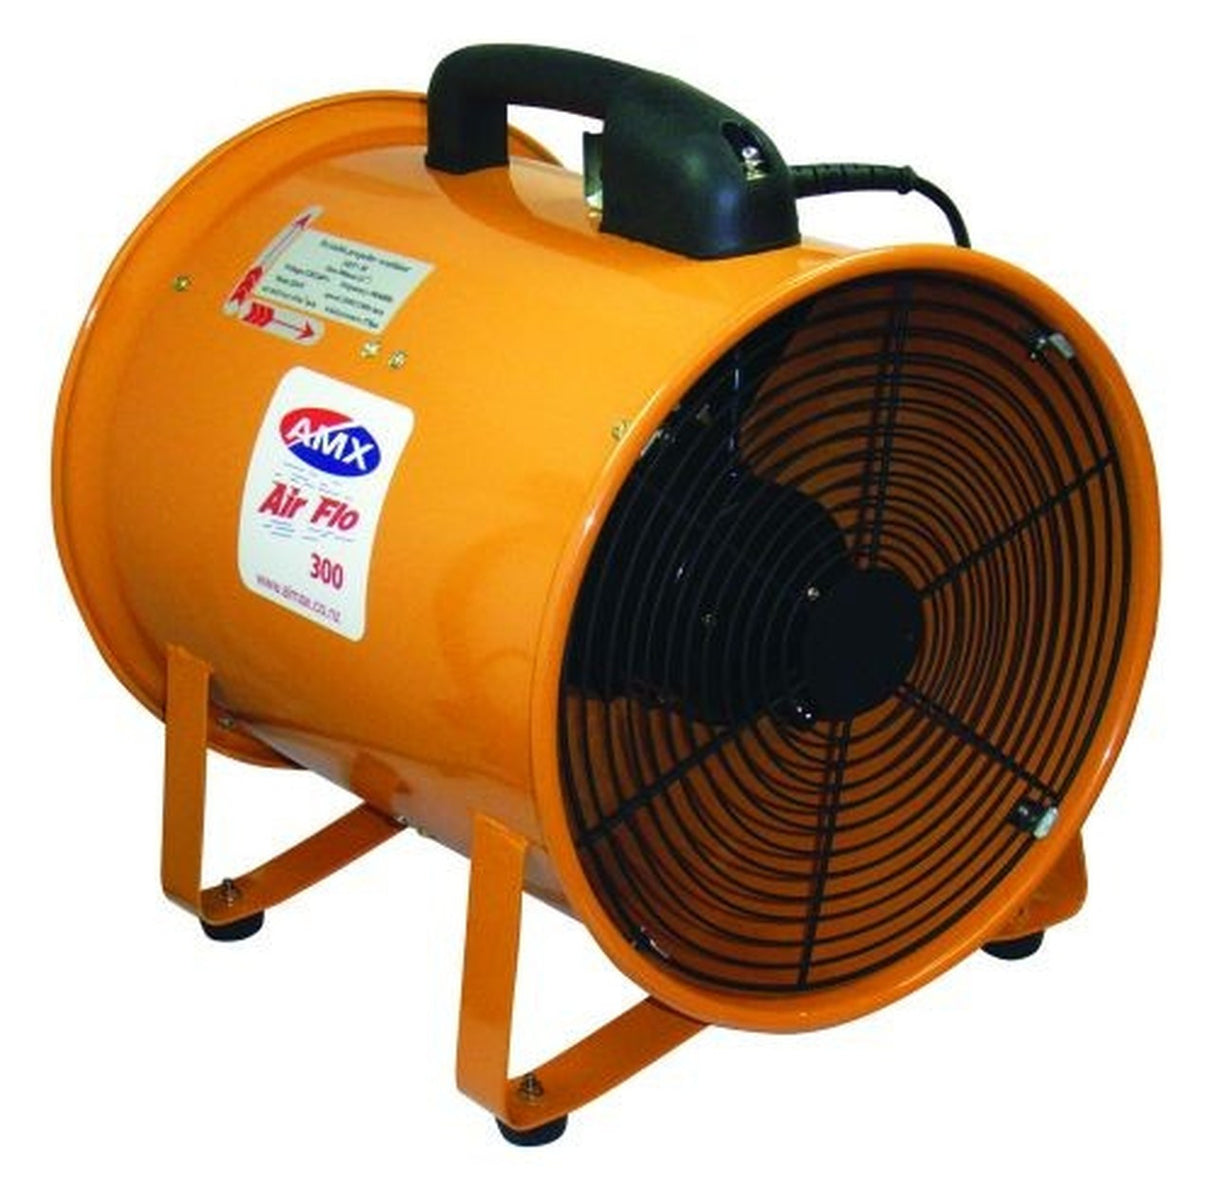 Complete Portable Overspray Ventilation System - Filter Box - Fan - Ducting